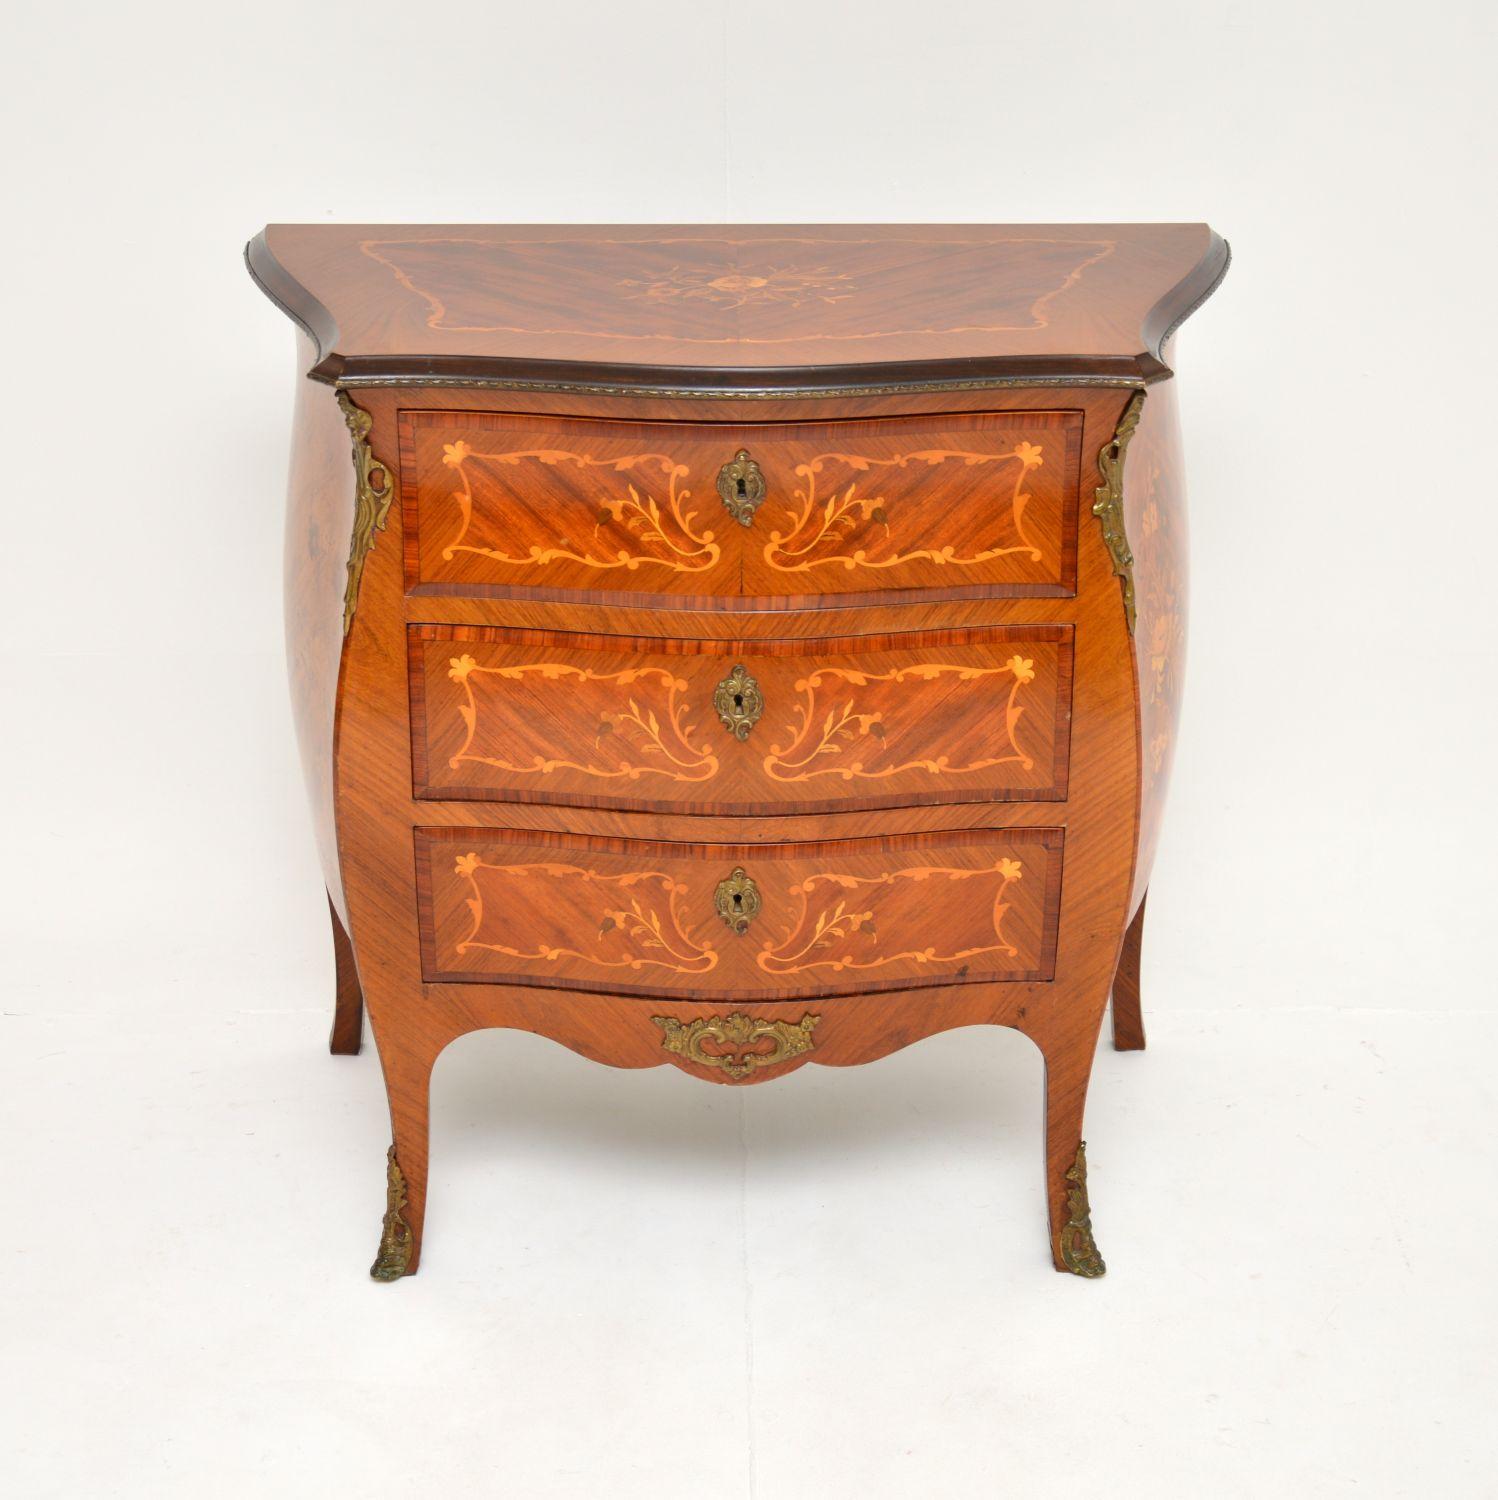 An absolutely stunning antique French bombe commode, dating from around the 1900-1910 period.

This is of superb quality, a great shape and it is a very useful size. There is profuse inlaid floral patterns of various woods throughout, and very high